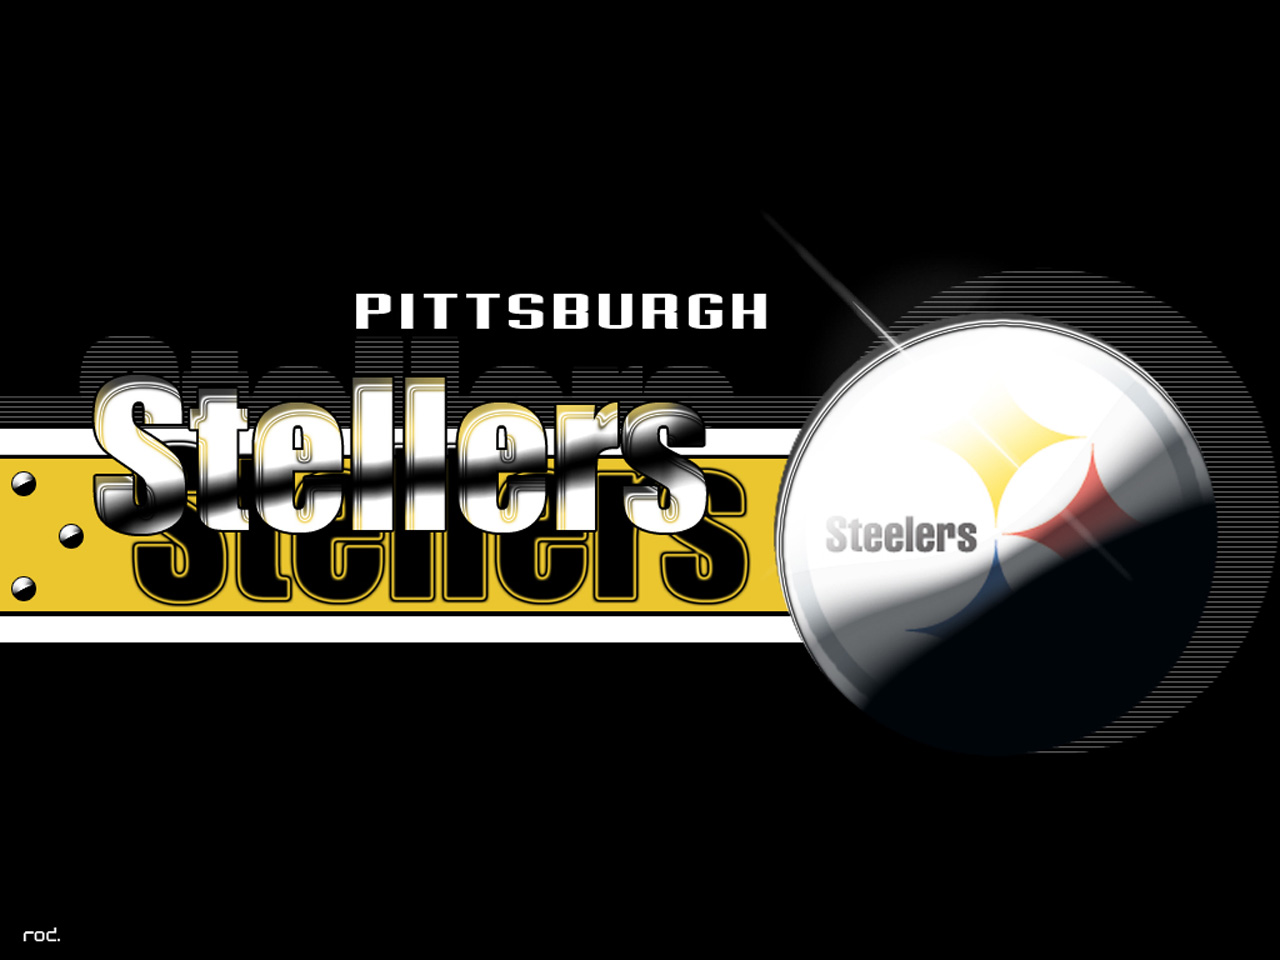  our new Pittsburgh Steelers wallpaper Pittsburgh Steelers wallpapers 1280x960